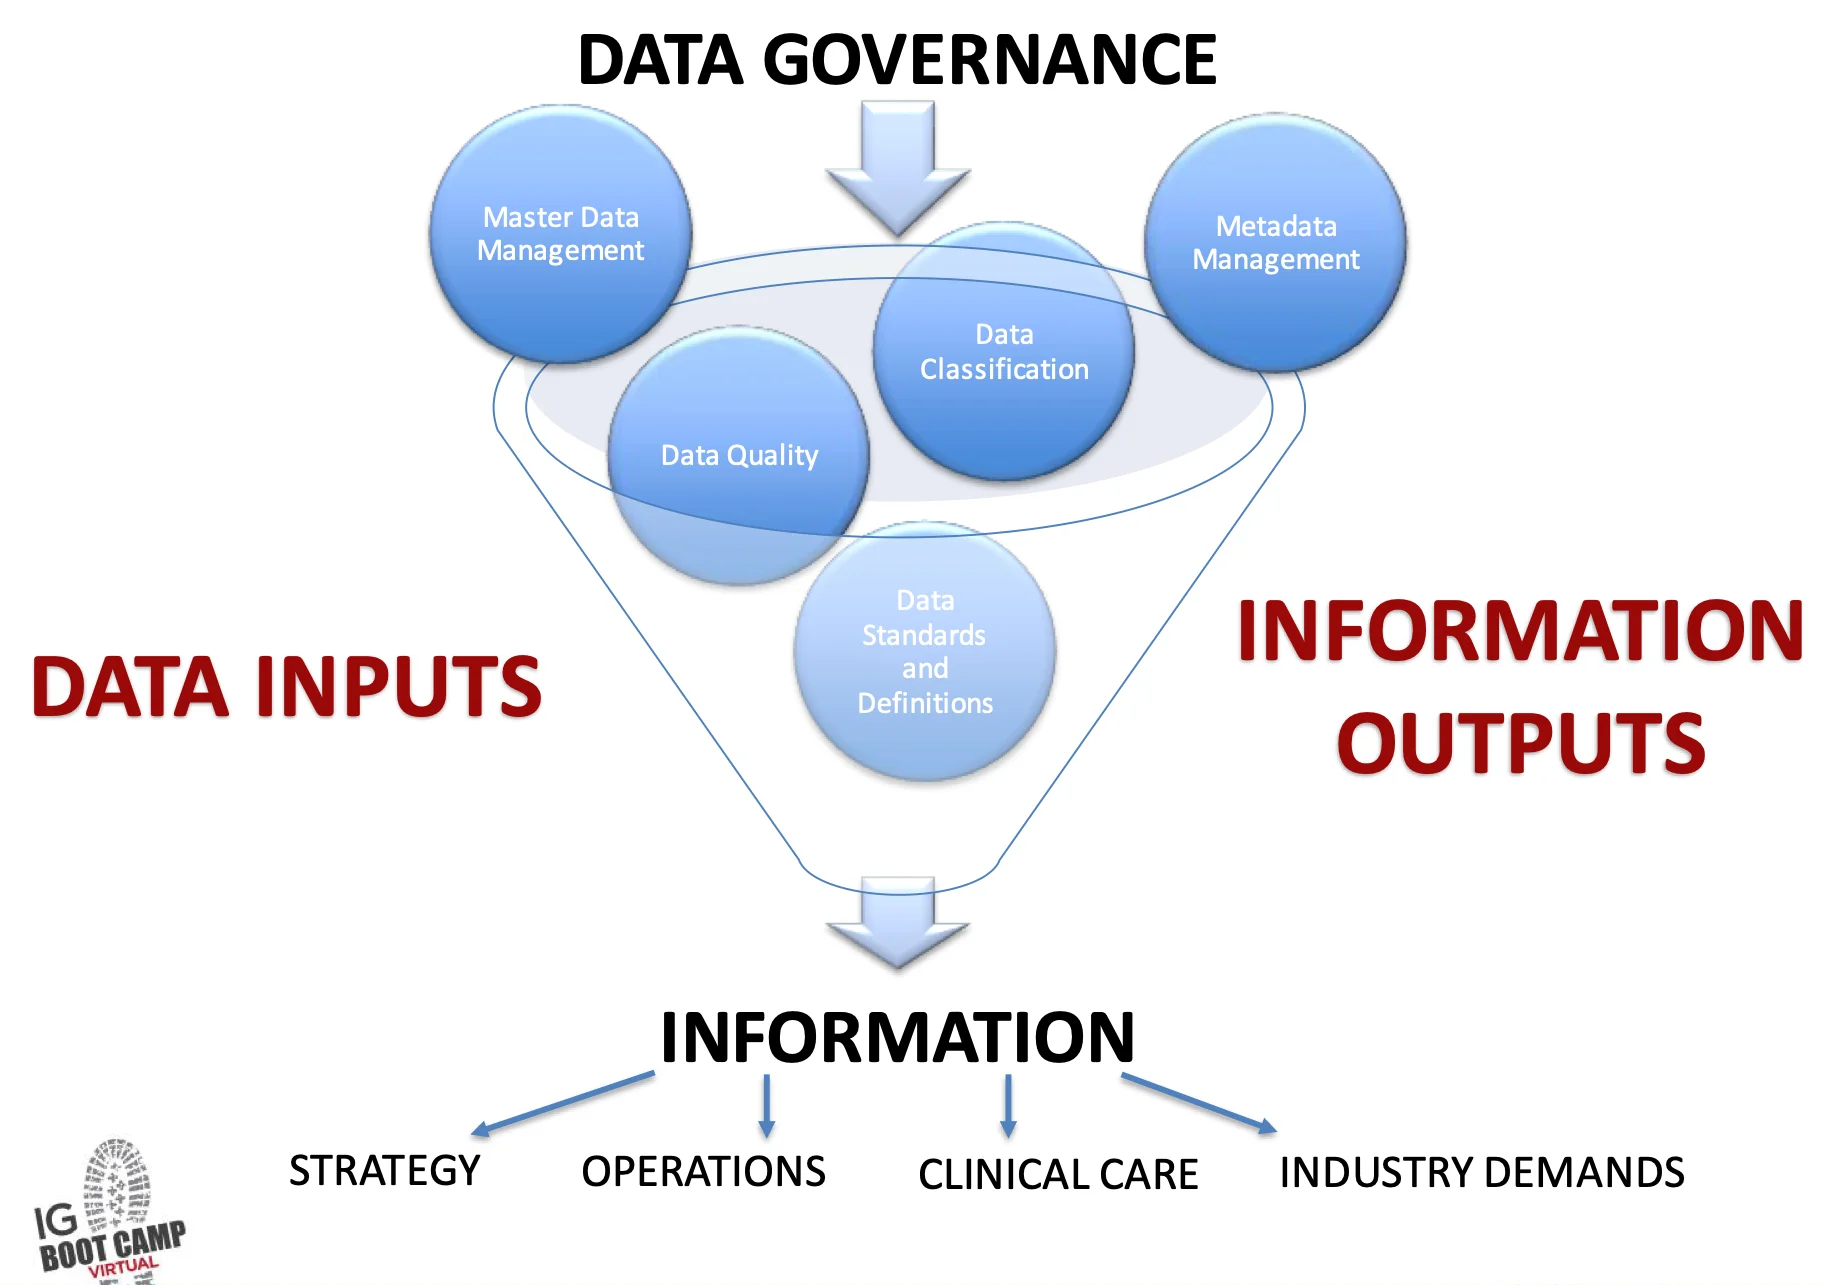 The various functional components of a data governance initiative in healthcare.